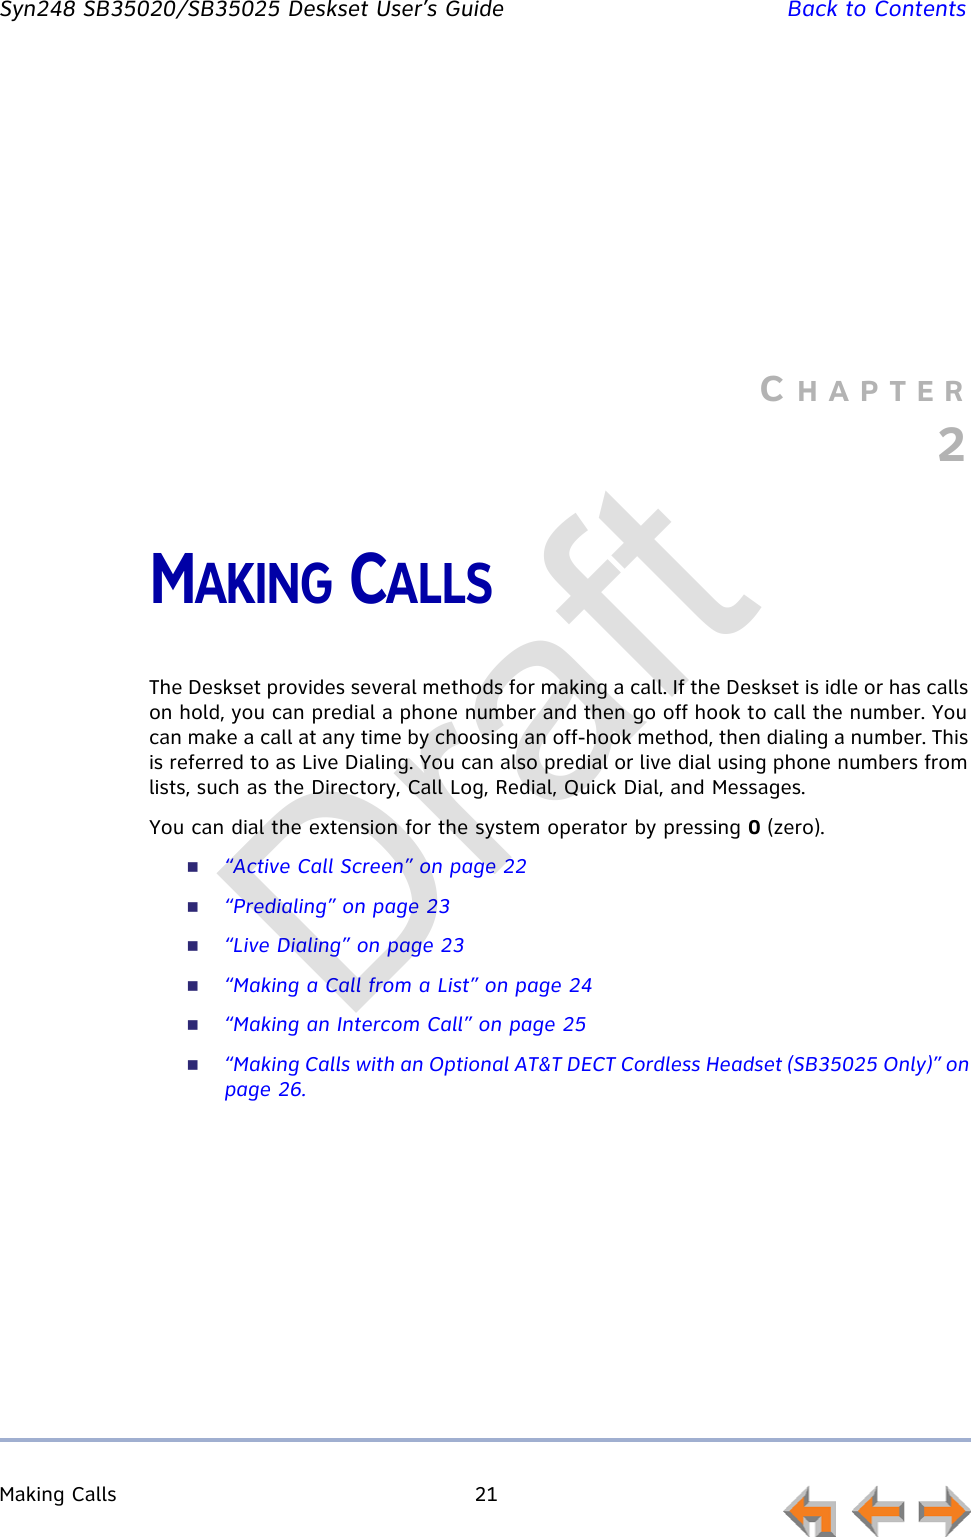 Making Calls 21         Syn248 SB35020/SB35025 Deskset User’s Guide Back to ContentsCHAPTER2MAKING CALLSThe Deskset provides several methods for making a call. If the Deskset is idle or has calls on hold, you can predial a phone number and then go off hook to call the number. You can make a call at any time by choosing an off-hook method, then dialing a number. This is referred to as Live Dialing. You can also predial or live dial using phone numbers from lists, such as the Directory, Call Log, Redial, Quick Dial, and Messages.You can dial the extension for the system operator by pressing 0 (zero).“Active Call Screen” on page 22“Predialing” on page 23“Live Dialing” on page 23“Making a Call from a List” on page 24“Making an Intercom Call” on page 25“Making Calls with an Optional AT&amp;T DECT Cordless Headset (SB35025 Only)” on page 26.Draft